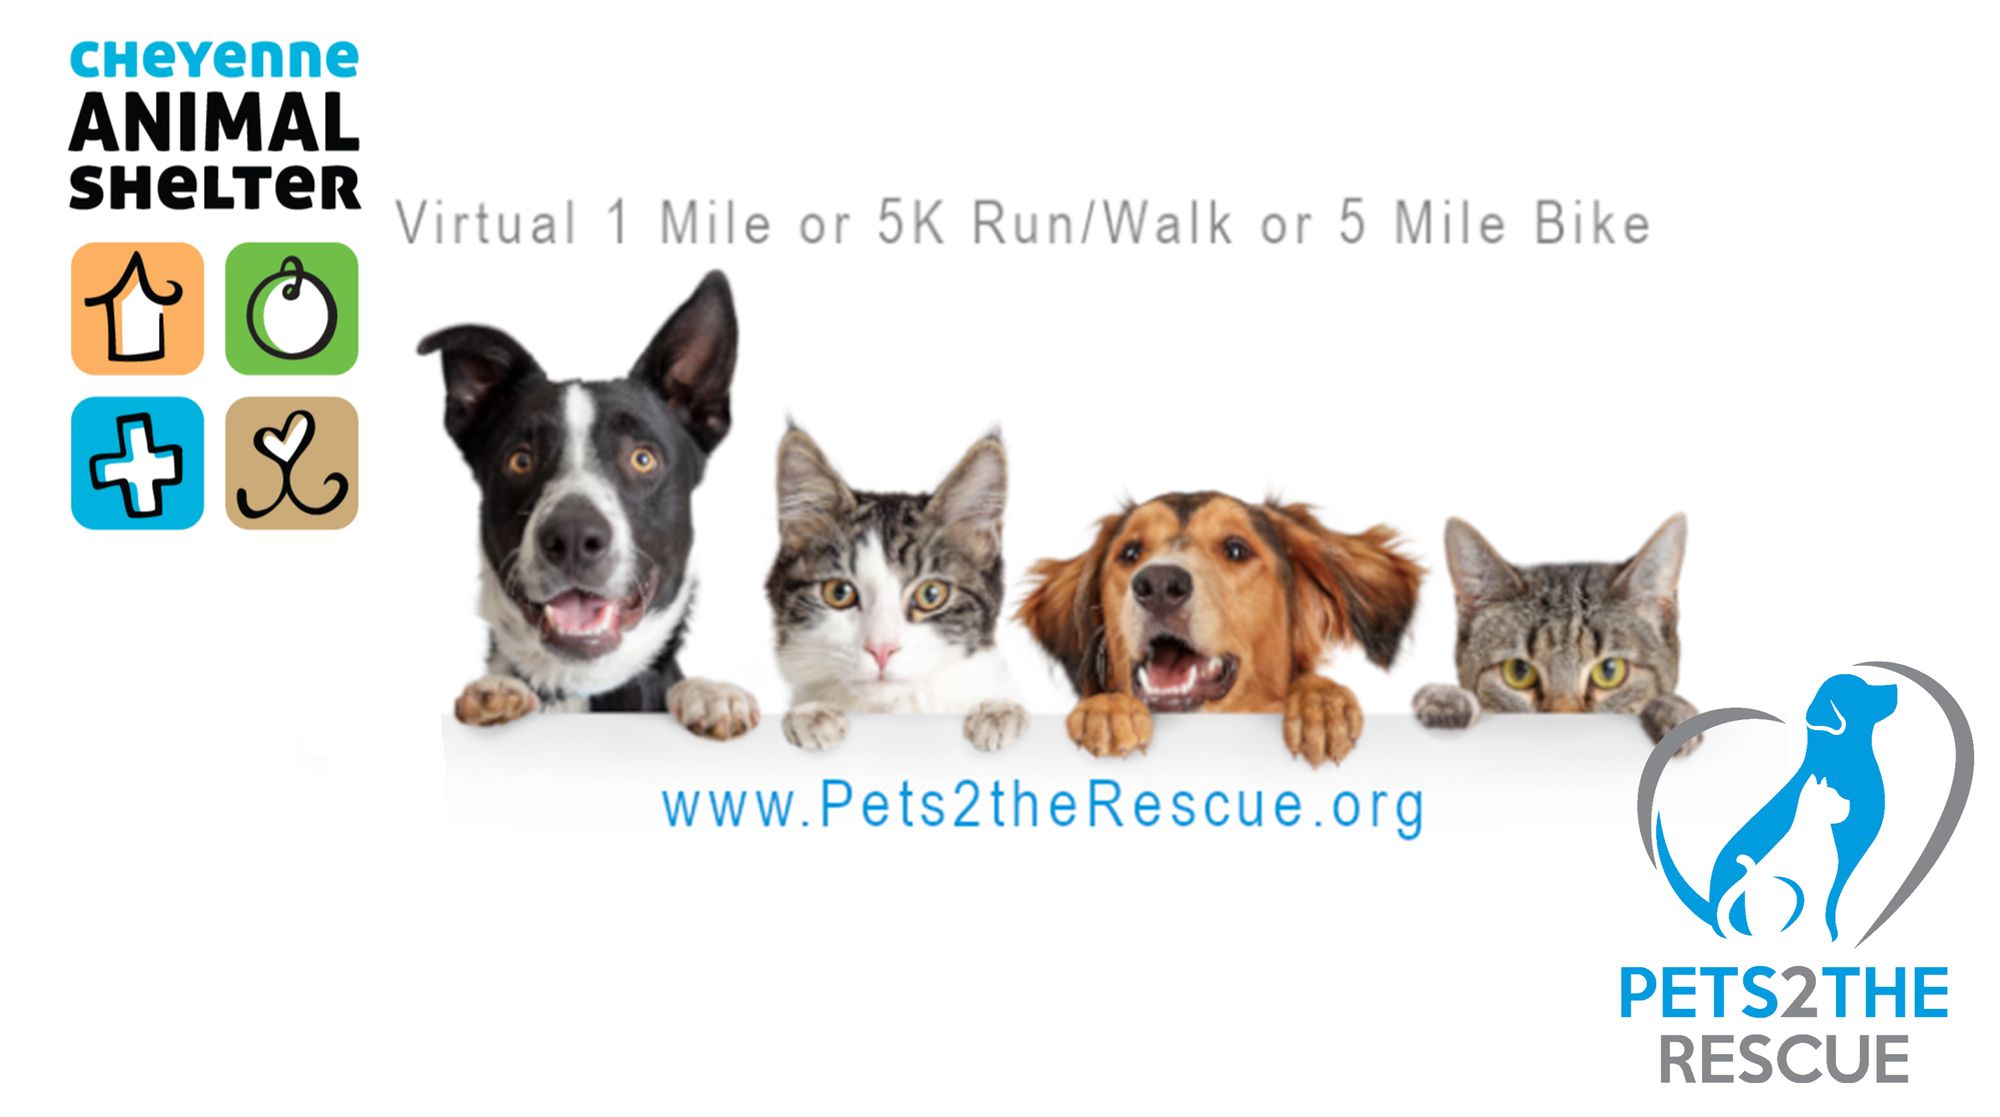 Stay Active And Support The Cheyenne Animal Shelter